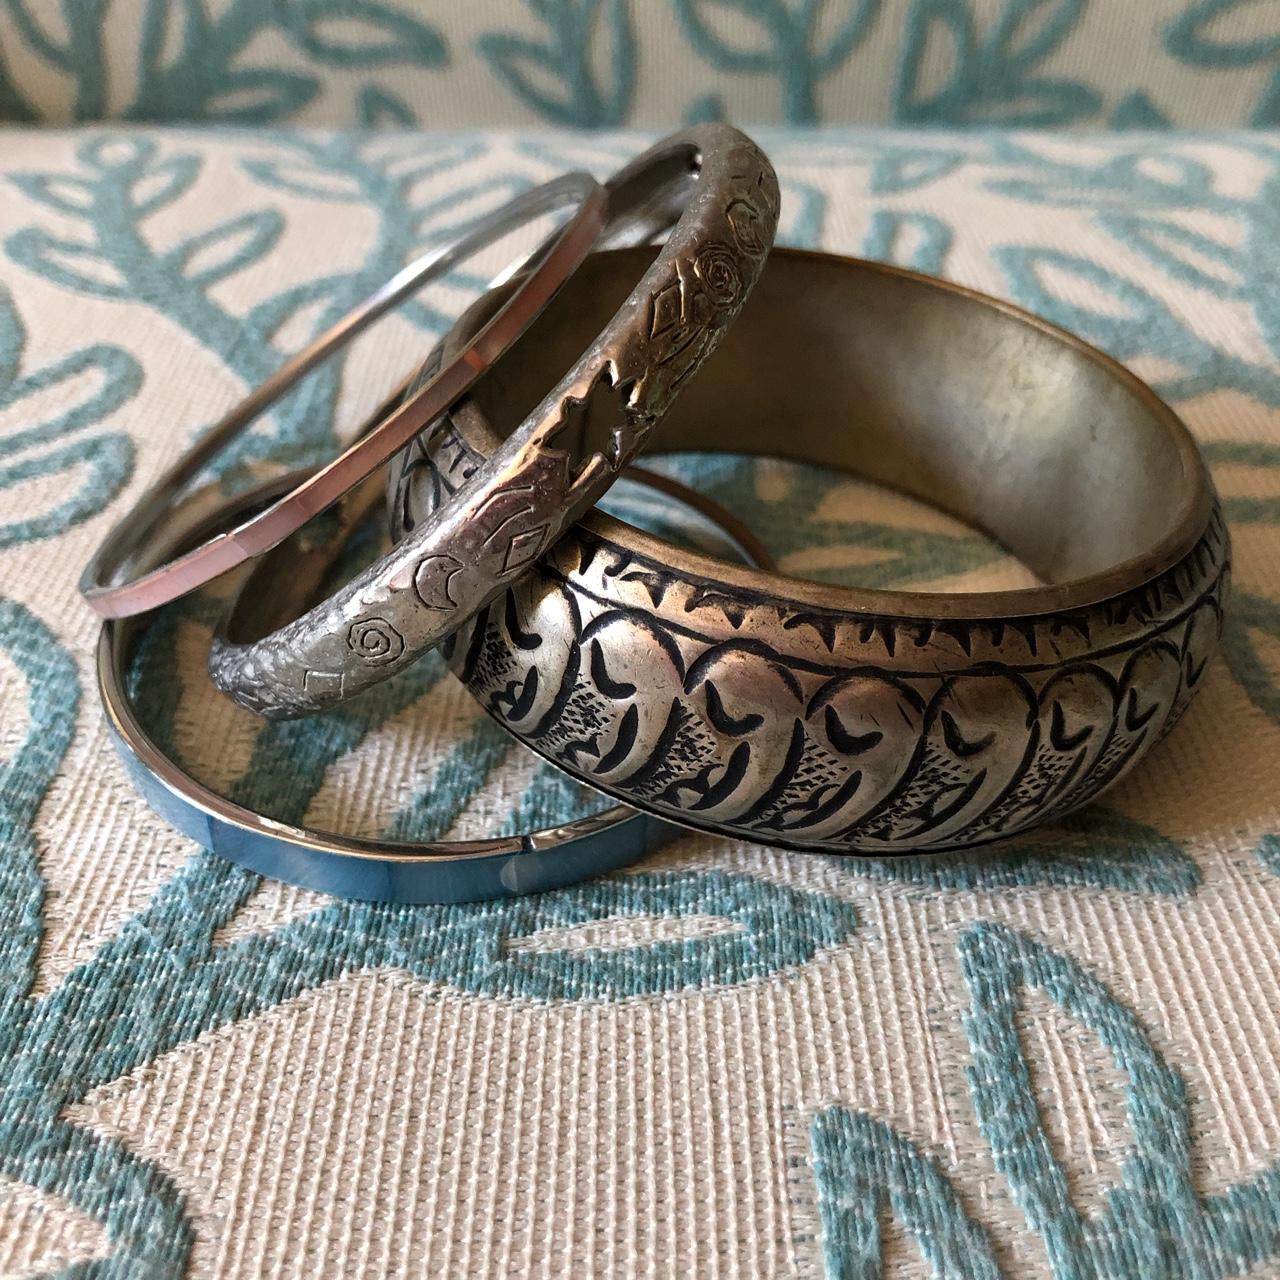 Bangles from unknown origins ⛓ Most likely from the... - Depop